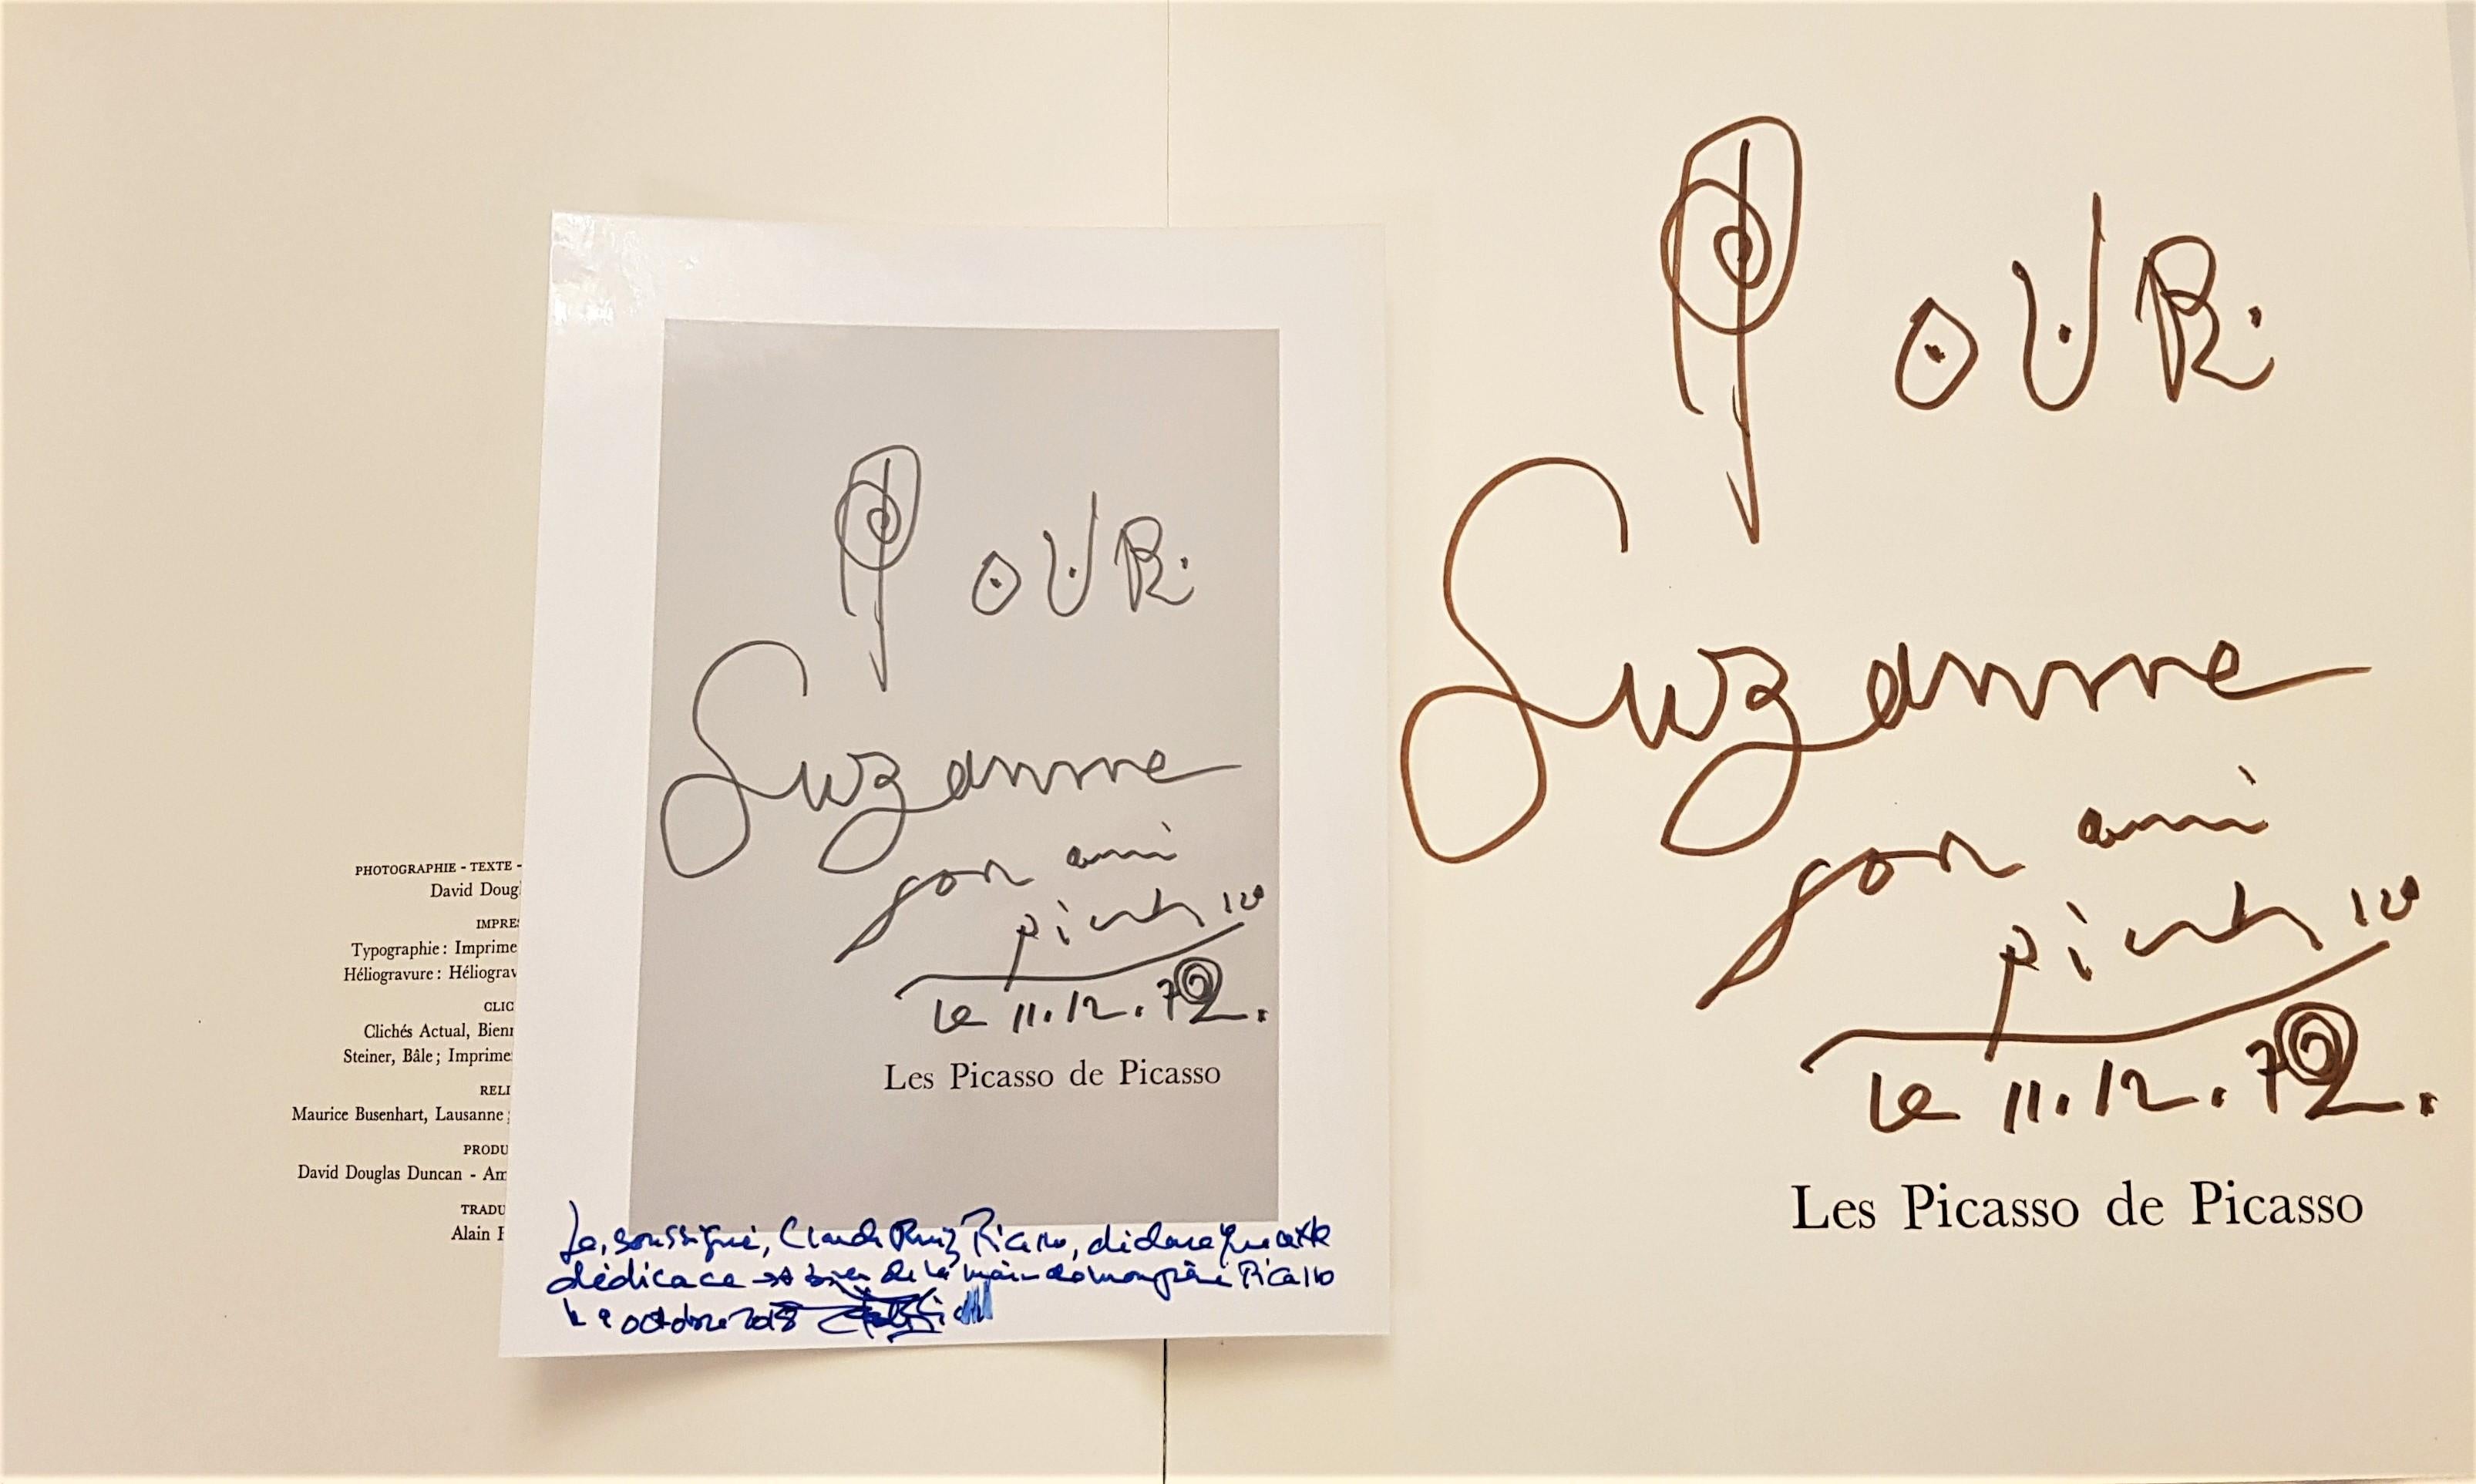 Inscribed and signed Pablo Picasso book from 1972, "Les Picasso de Picasso" 